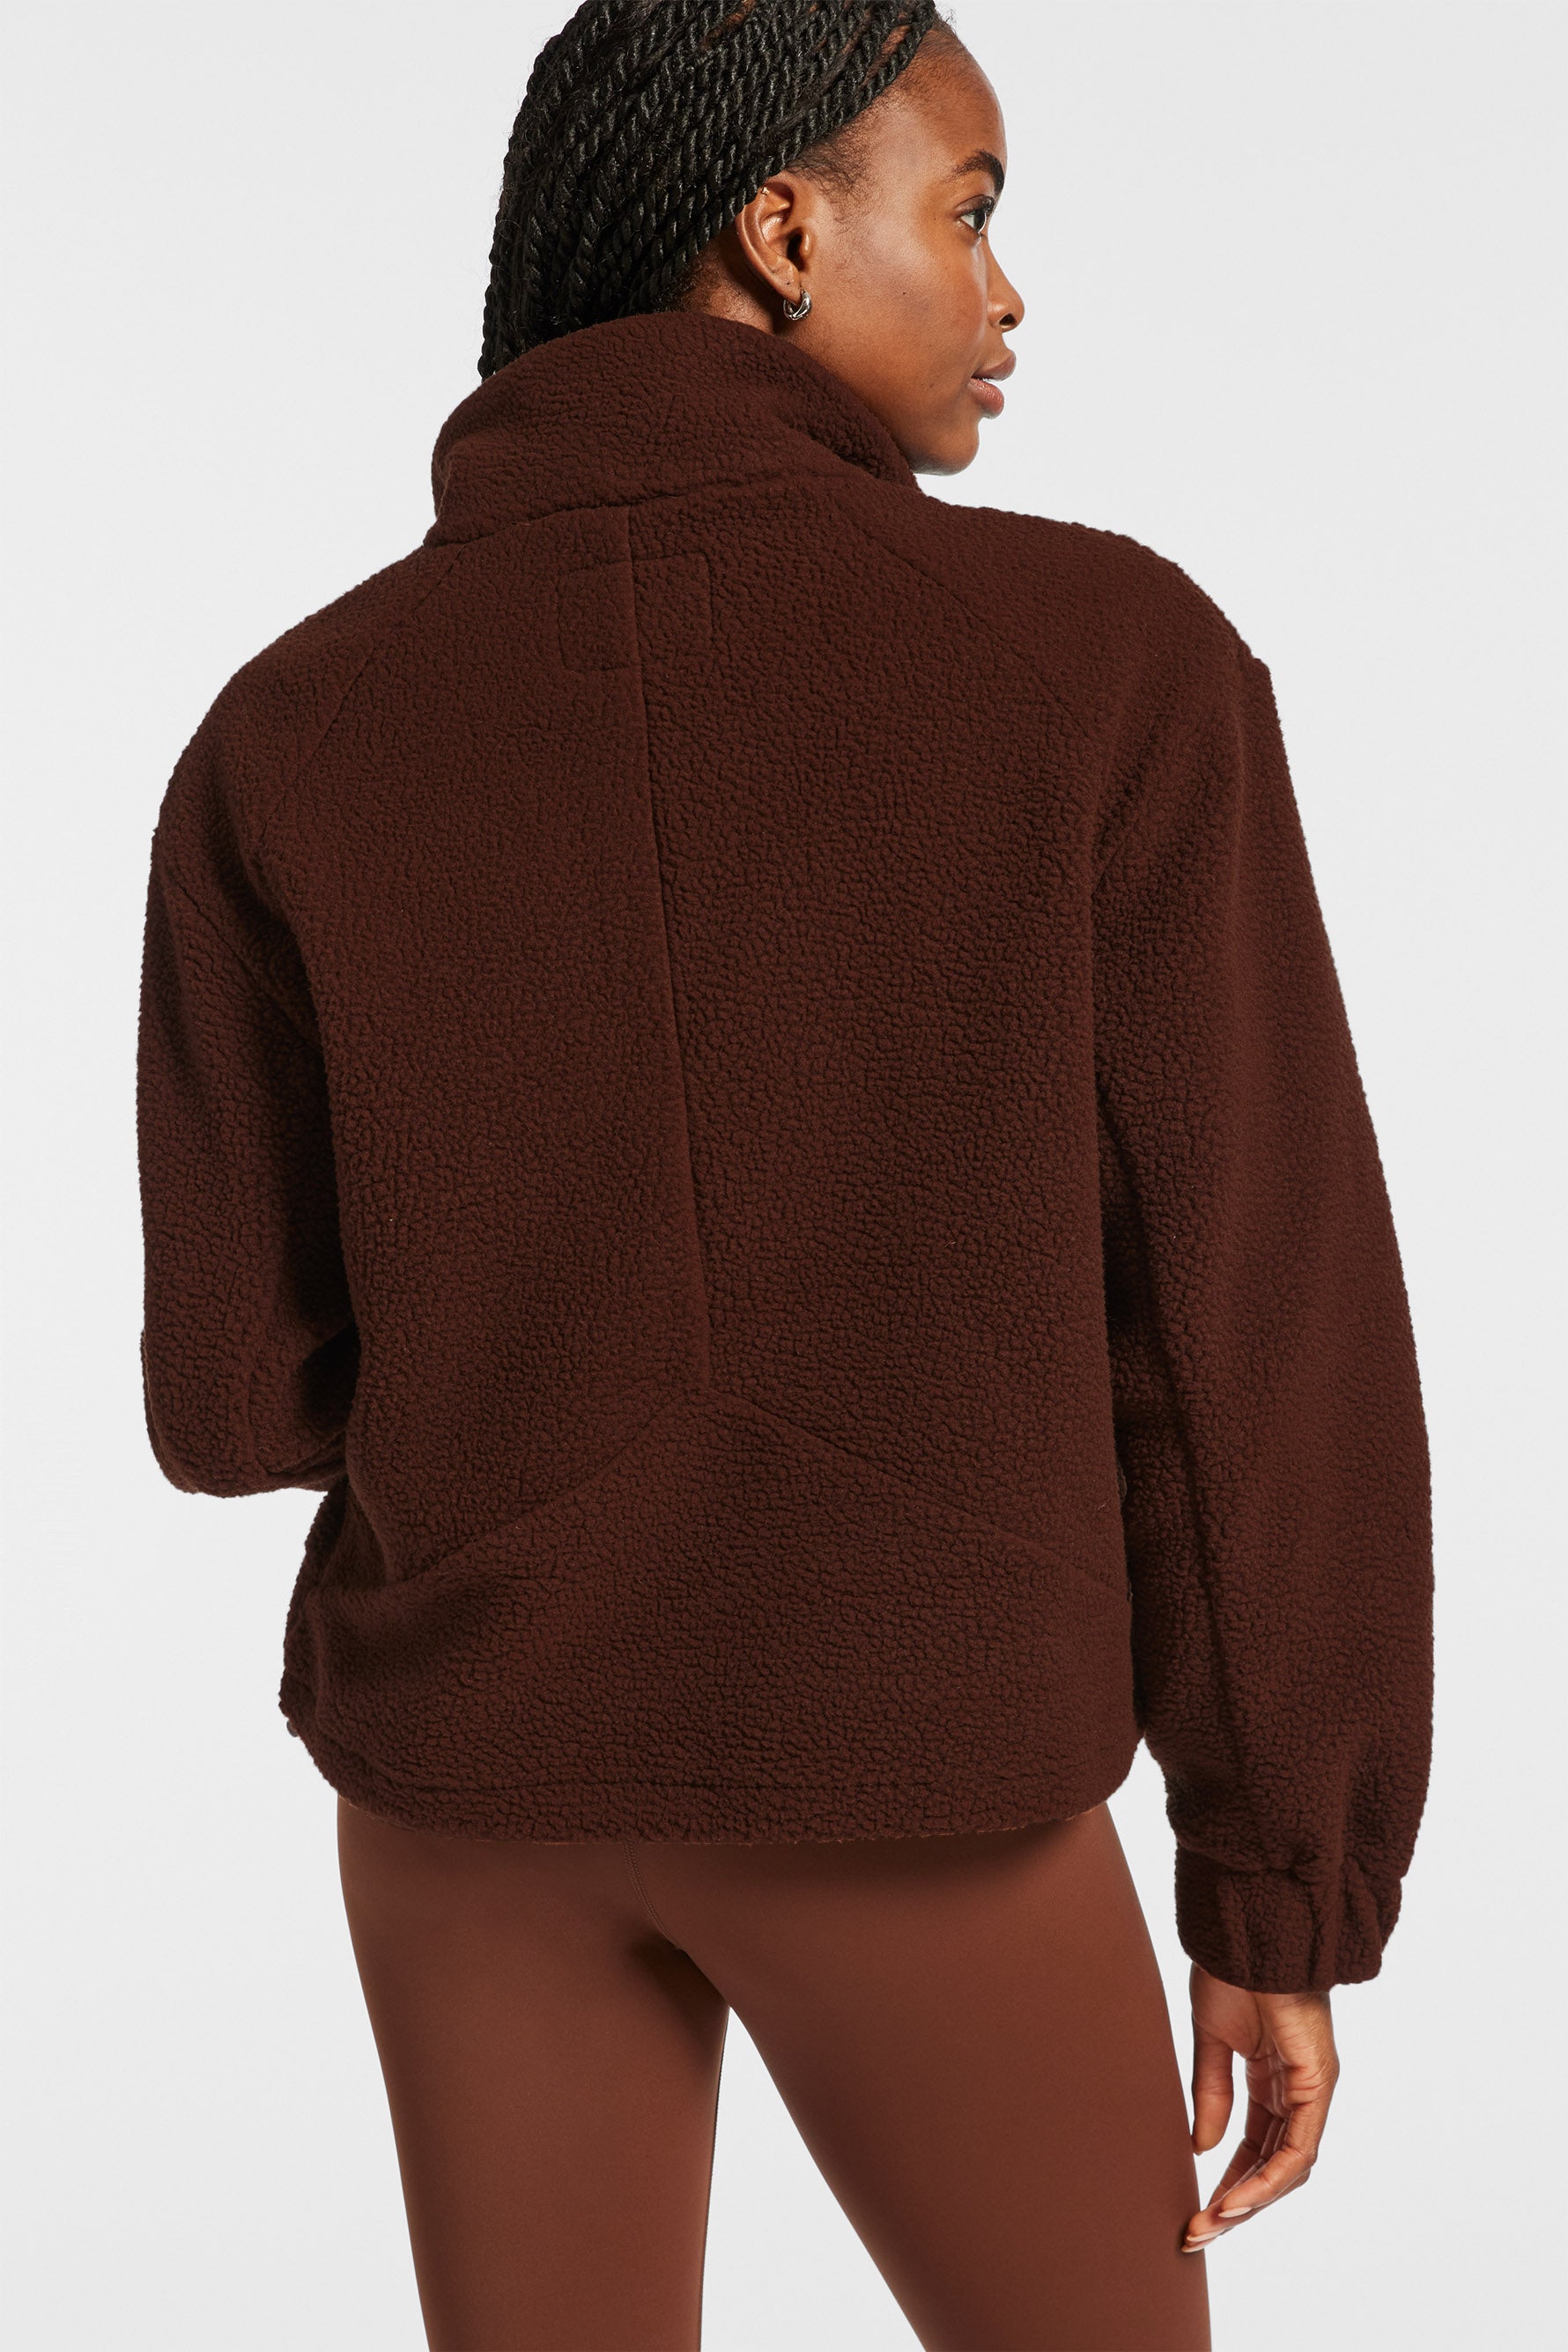 IVL Collective - Fleece Pullover